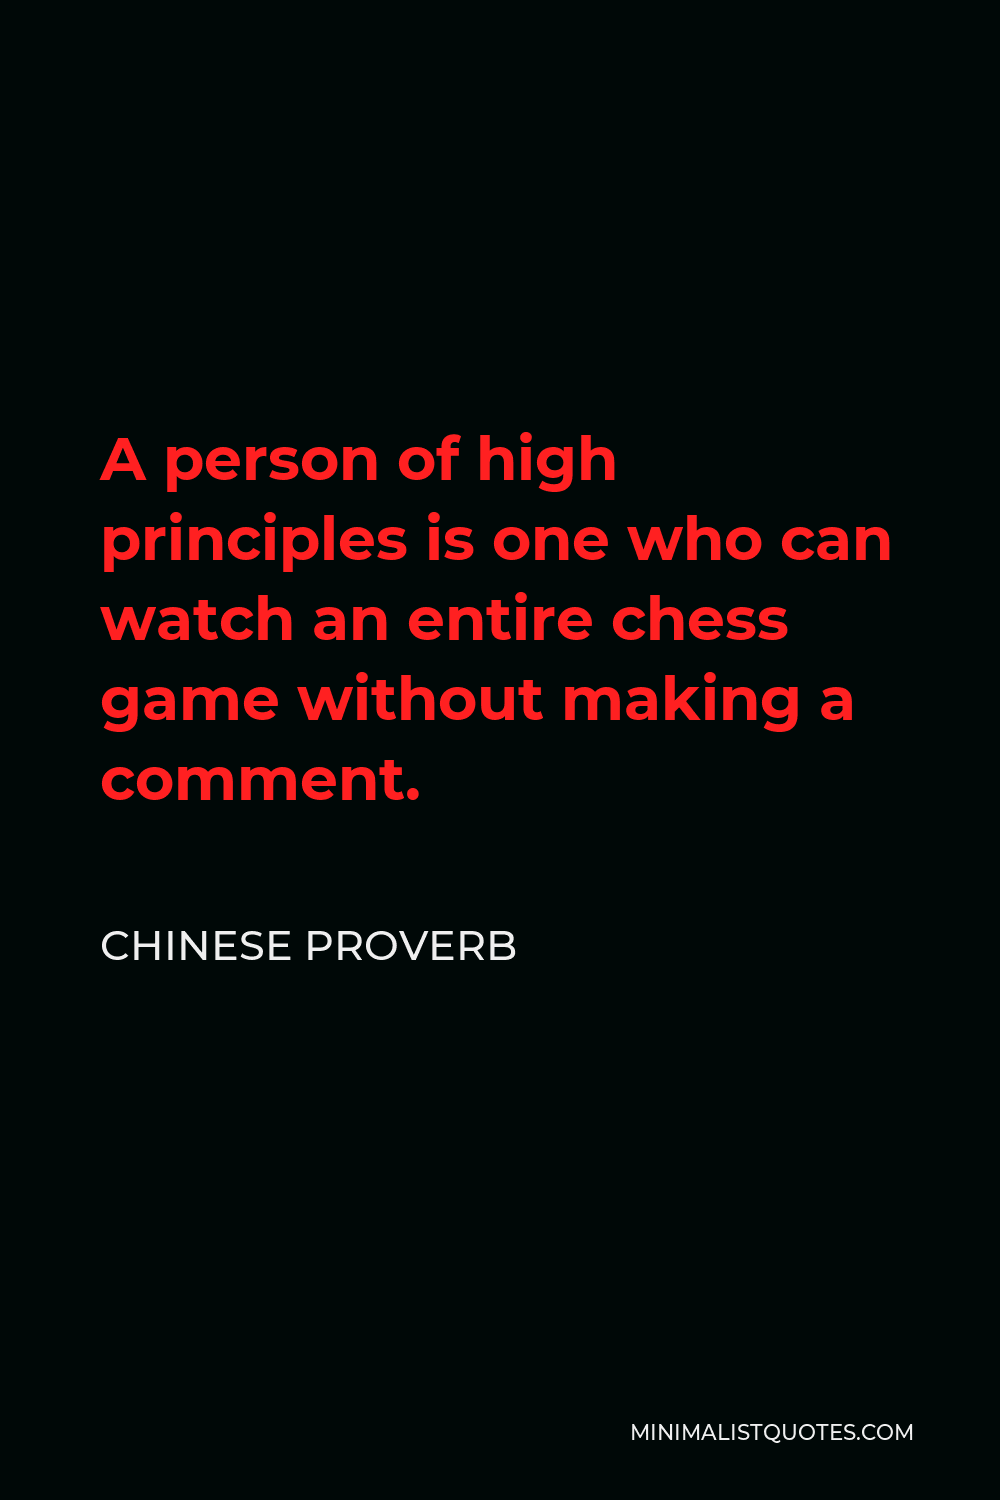 Chinese Proverb Quote - A person of high principles is one who can watch an entire chess game without making a comment.